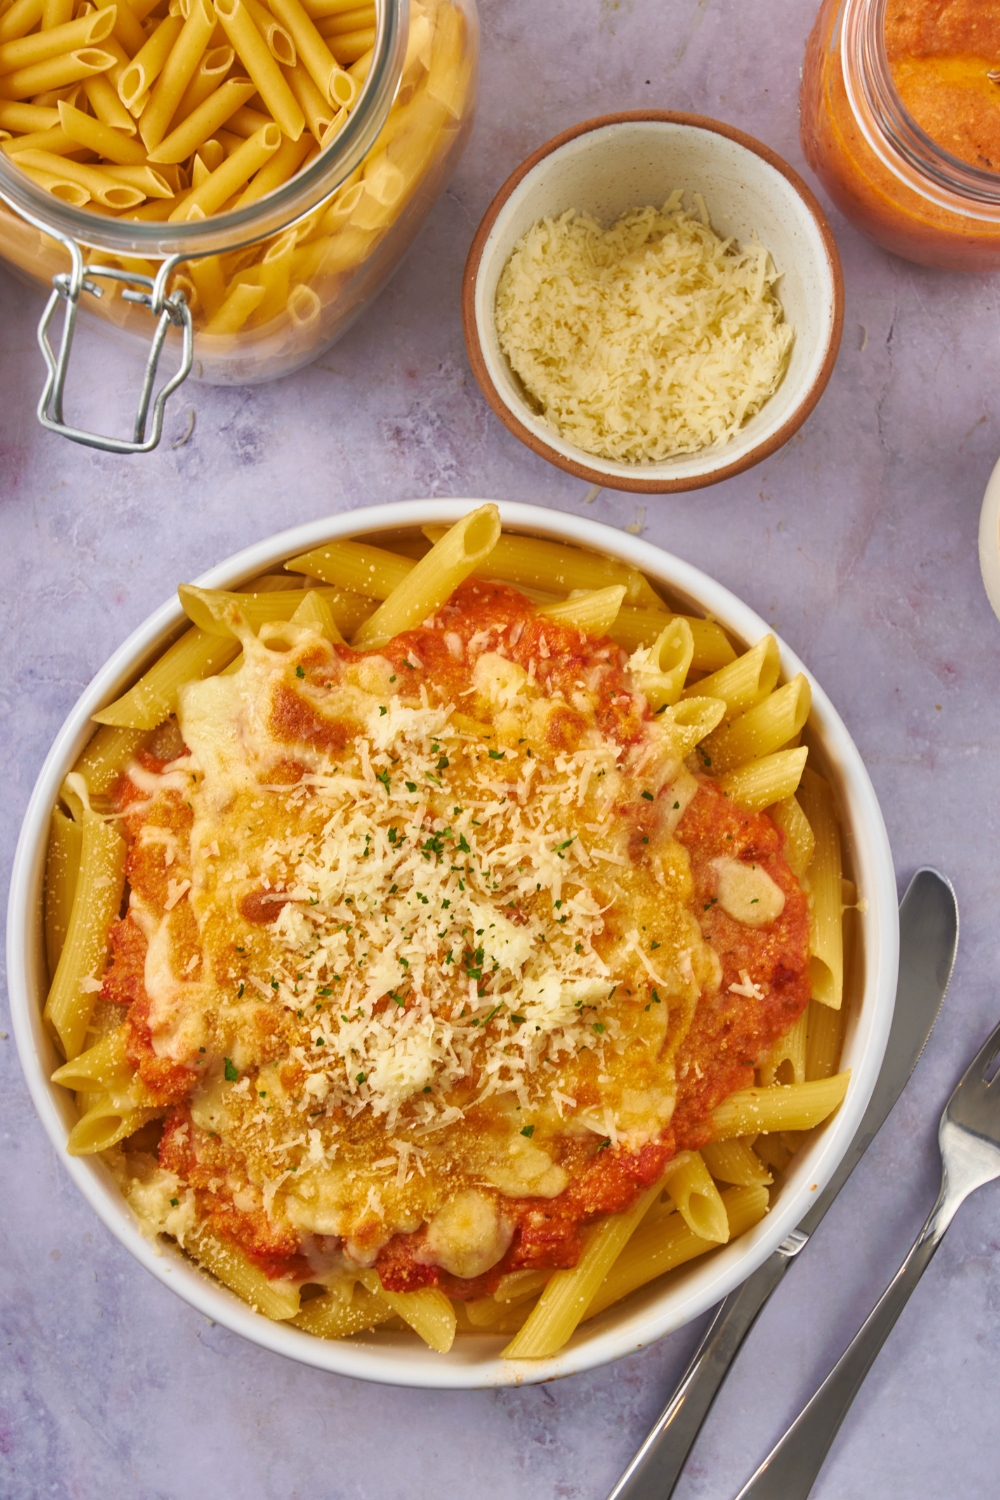 Overhead view of a bowl of ziti topped with a creamy marinara sauce, shredded cheese, and fresh herbs. There is a bowl of shredded cheese next to the pasta.